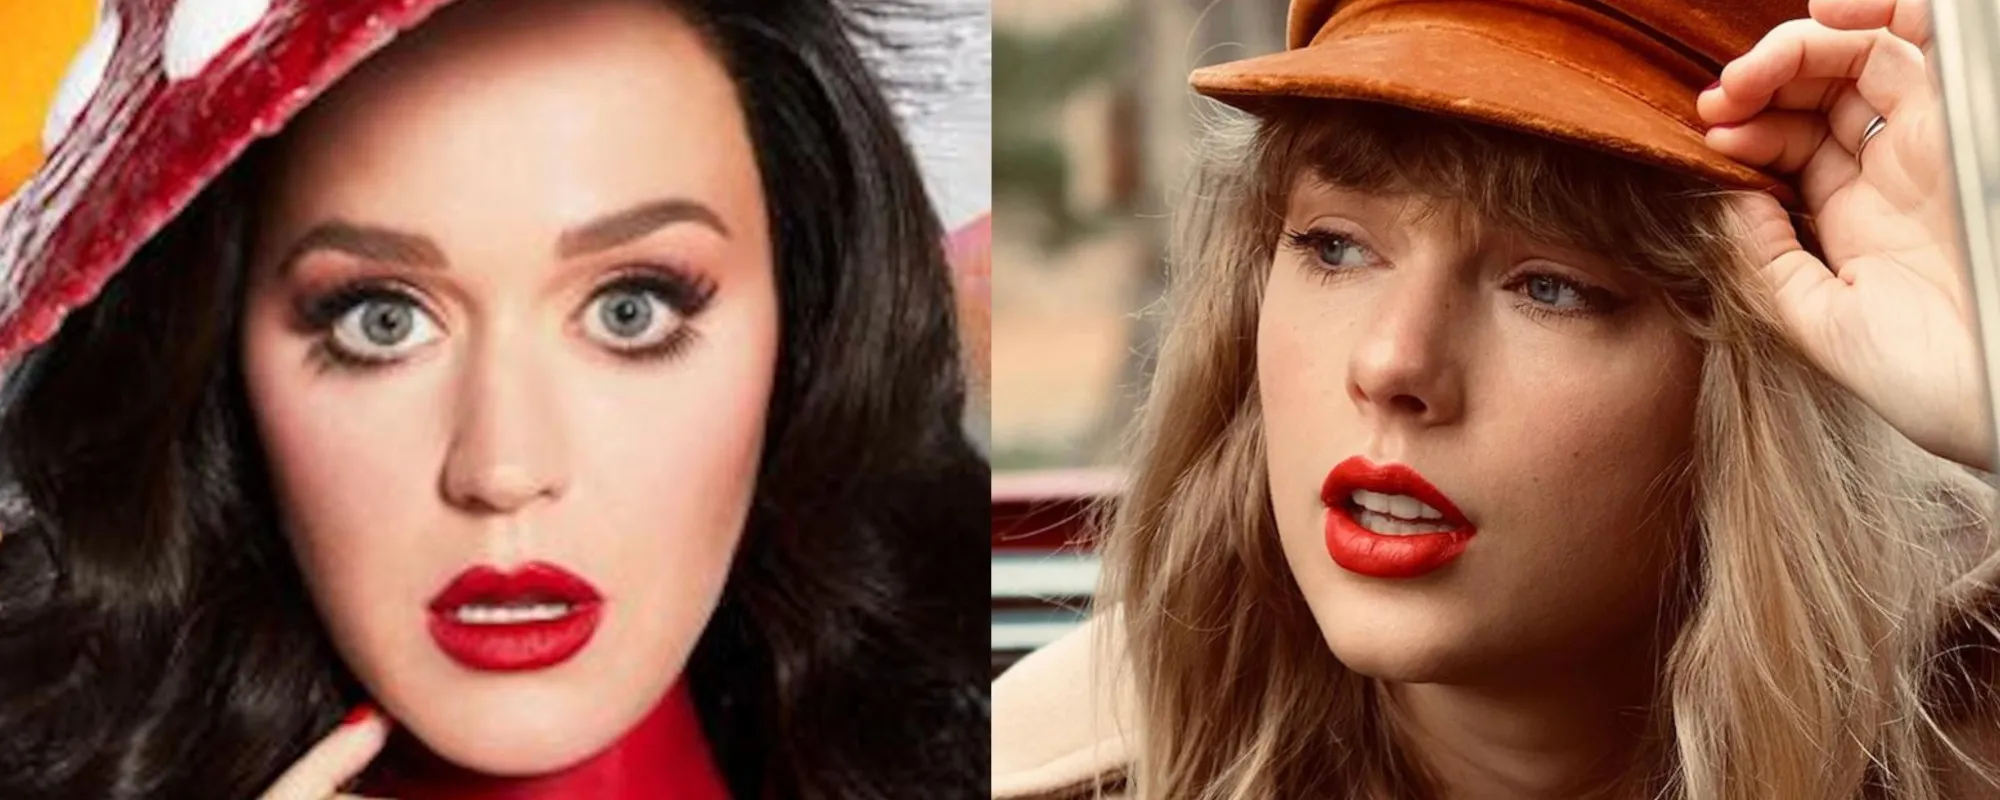 Did Katy Perry and Taylor Swift Finally Squash Their Bad Blood?